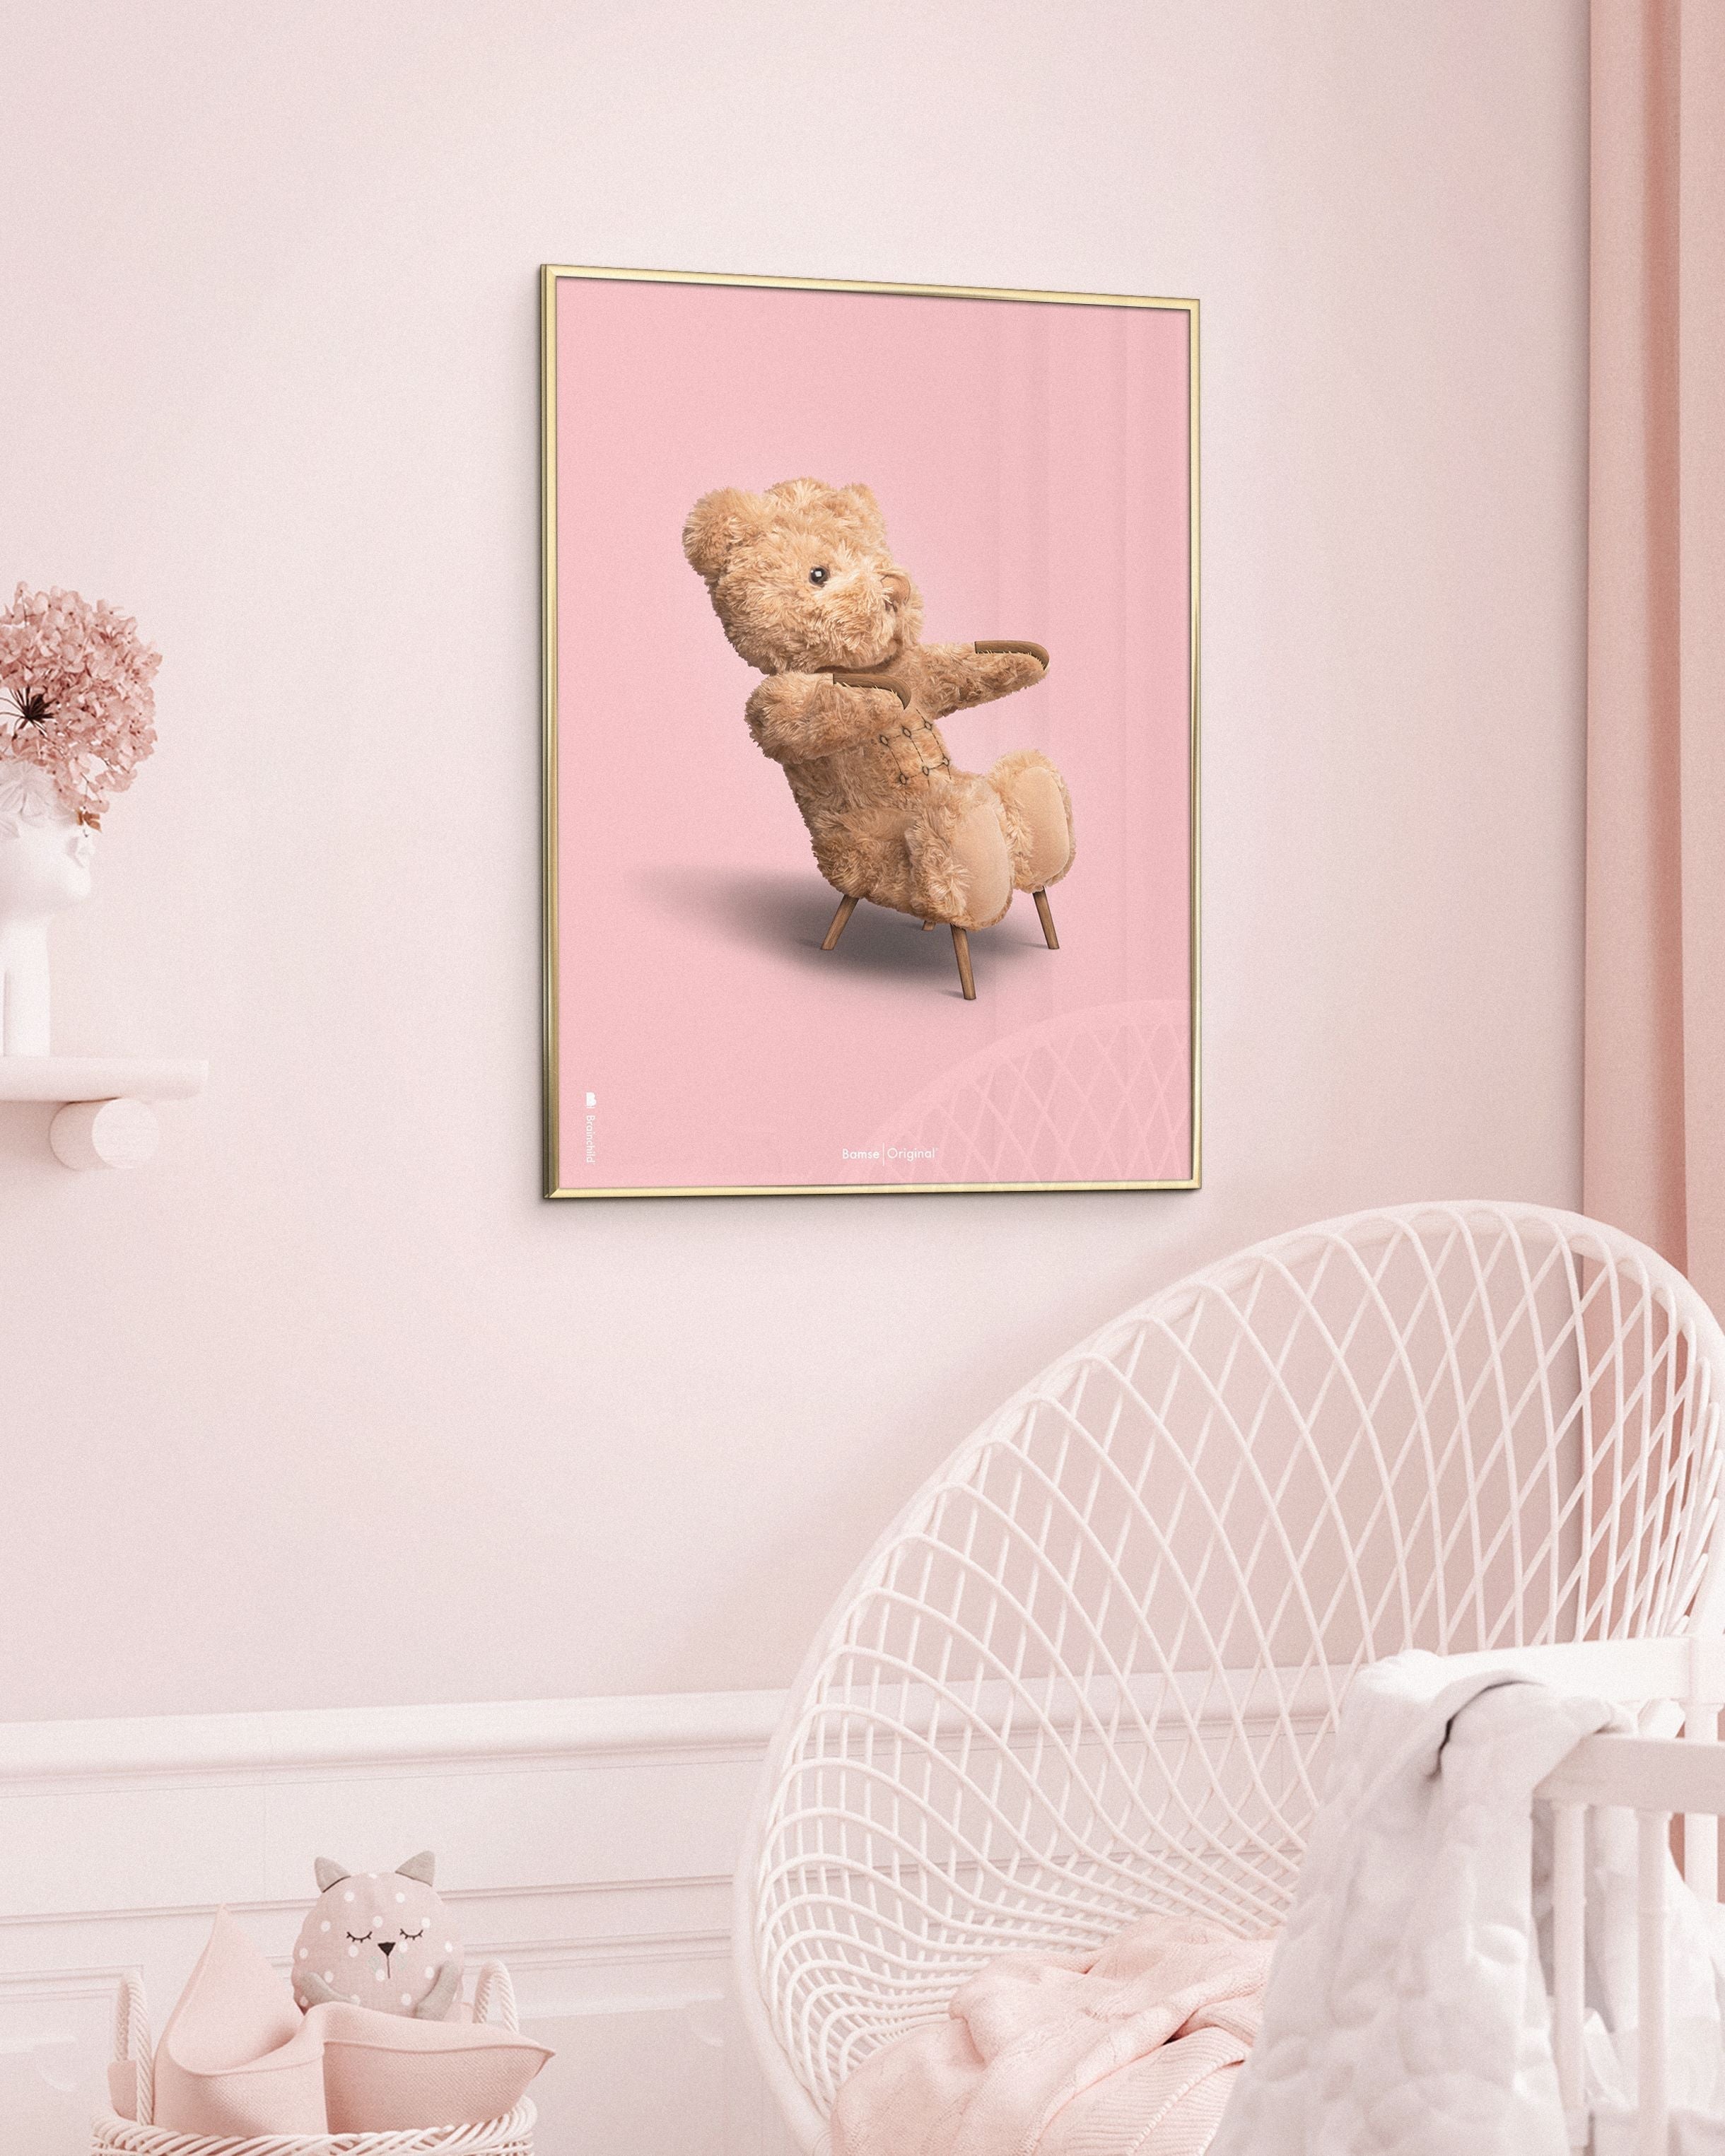 Brainchild Teddy Bear Classic Poster Frame Made Of Light Wood Ramme 70x100 Cm, Pink Background